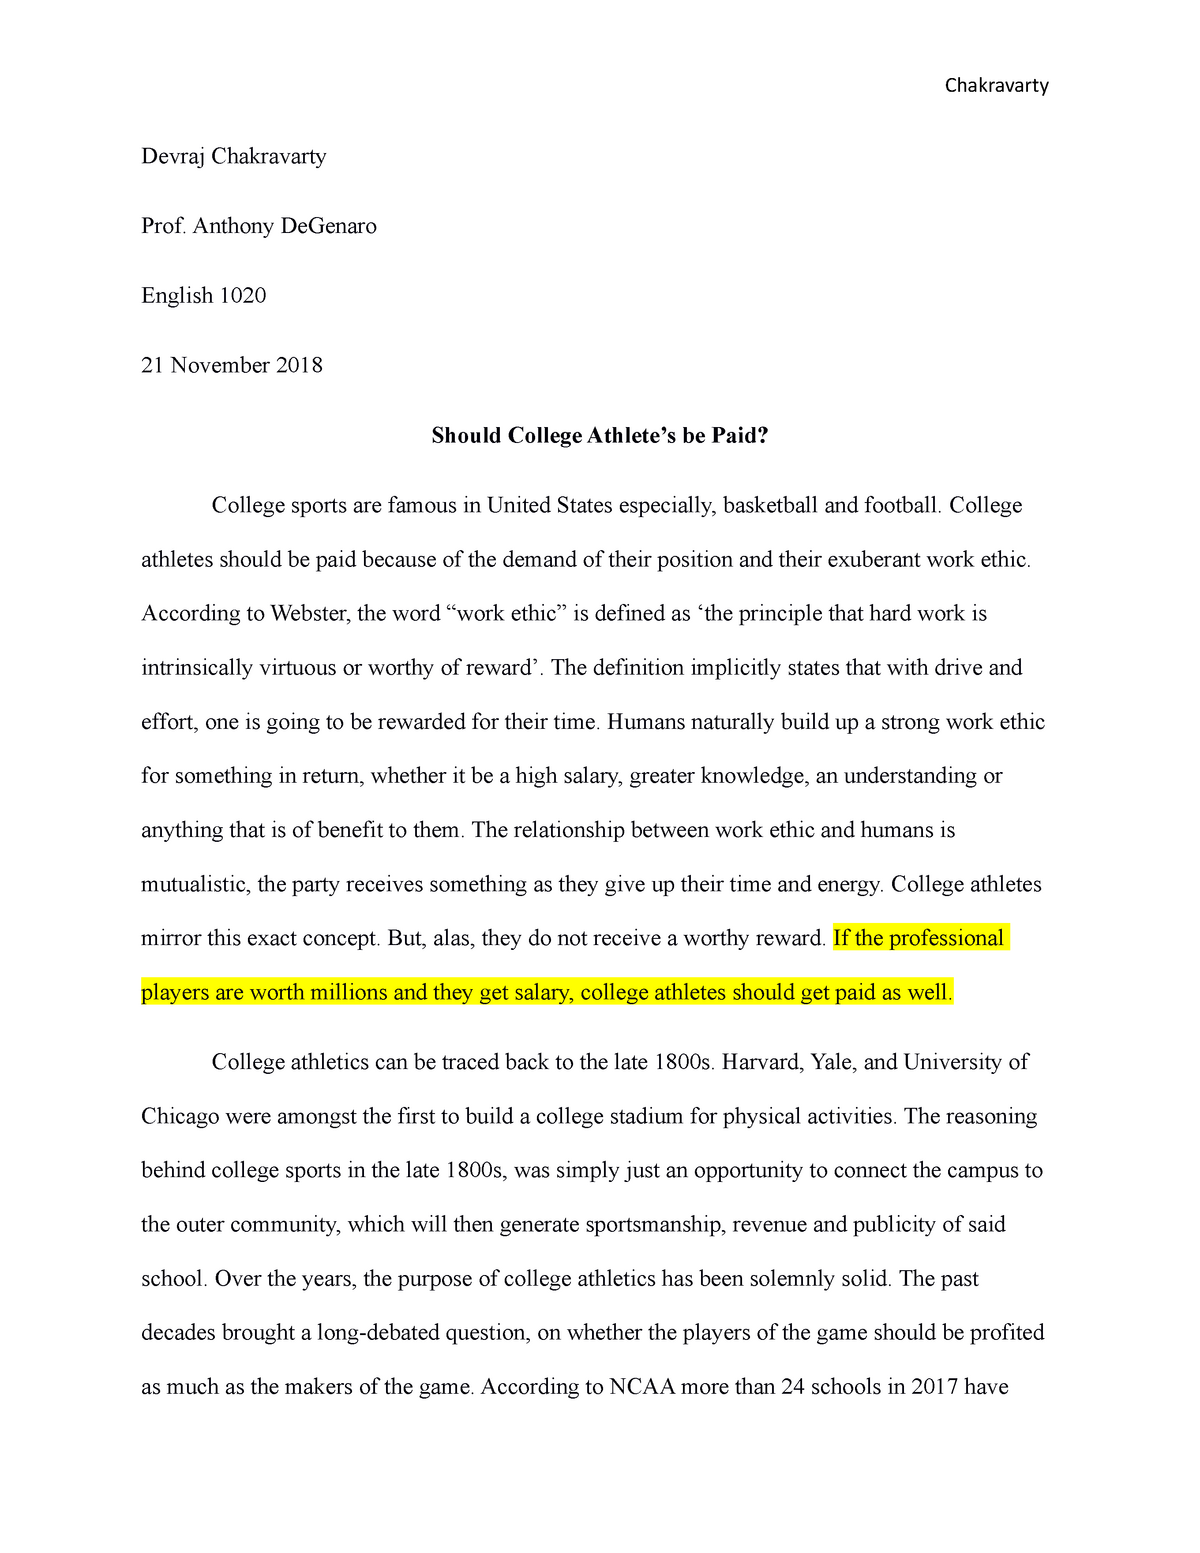 research paper on why college athletes should be paid